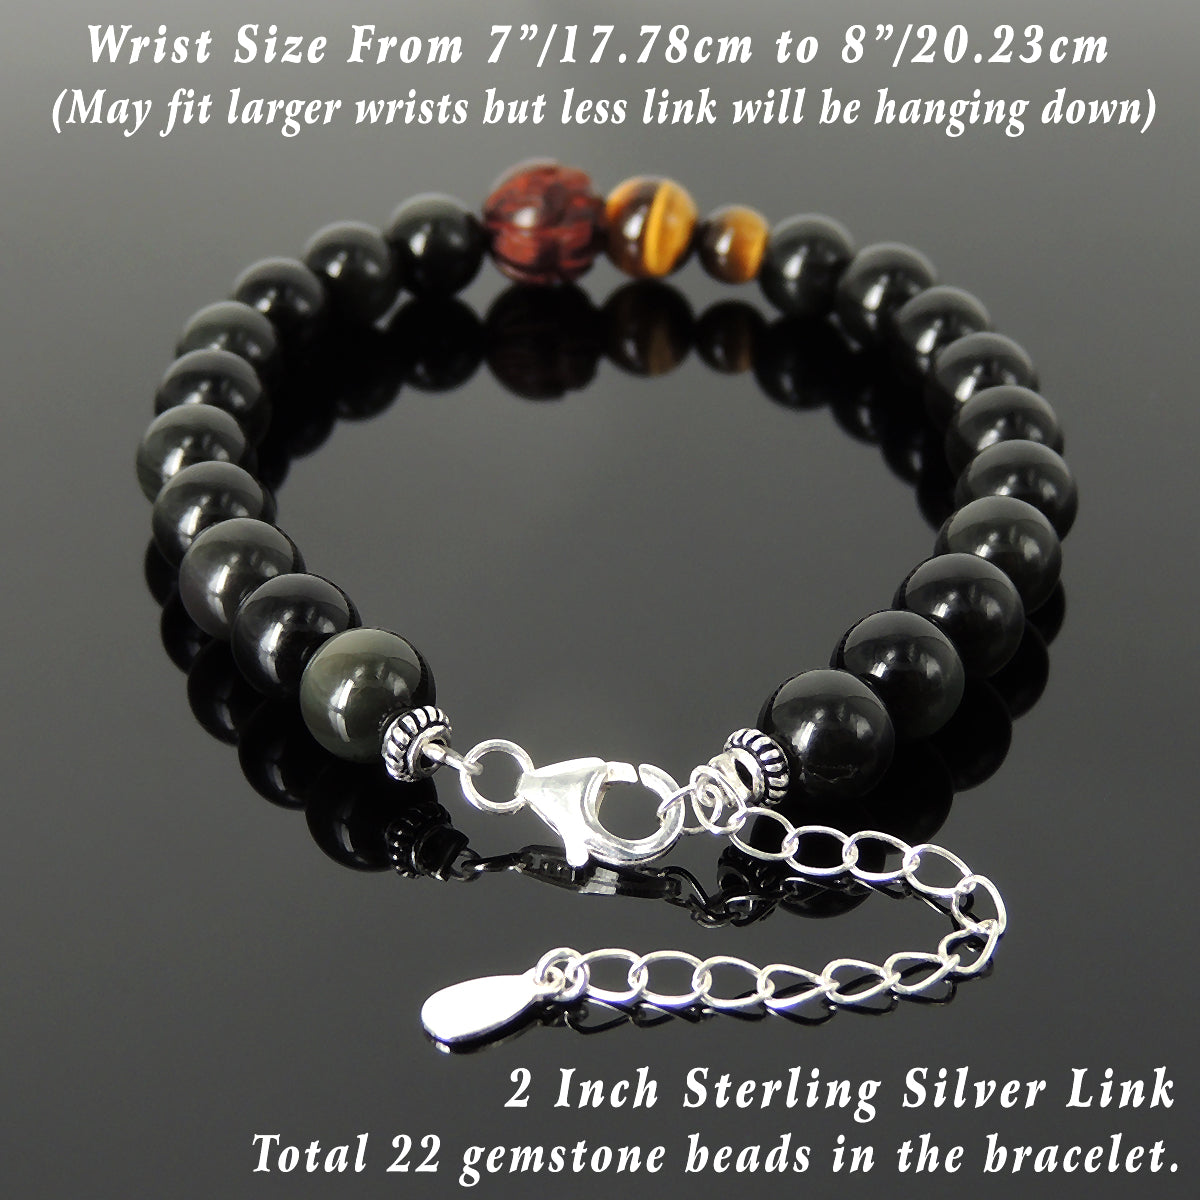 8mm Grade 3A Brown Tiger Eye & Rainbow Black Obsidian Healing Gemstone Bracelet with Natural India Rosewood Lotus, S925 Sterling Silver Chain & Clasp - Handmade by Gem & Silver BR1371